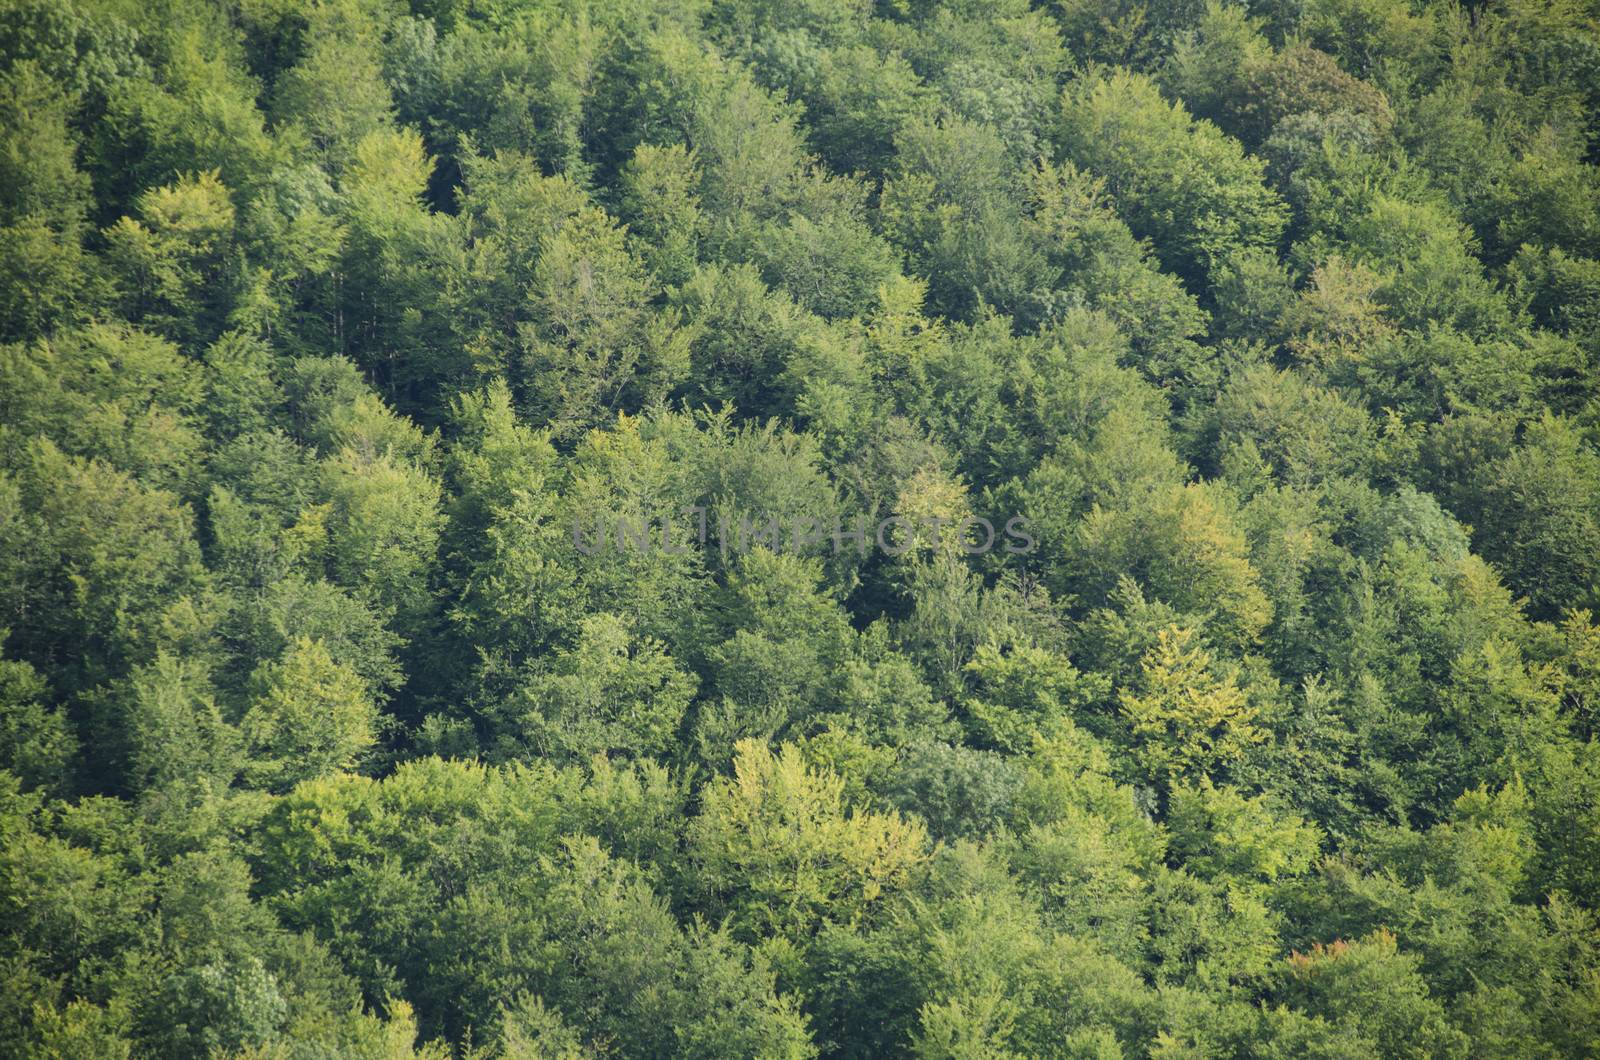 Deciduous beech forest canopy as seen from above in summer in Germany